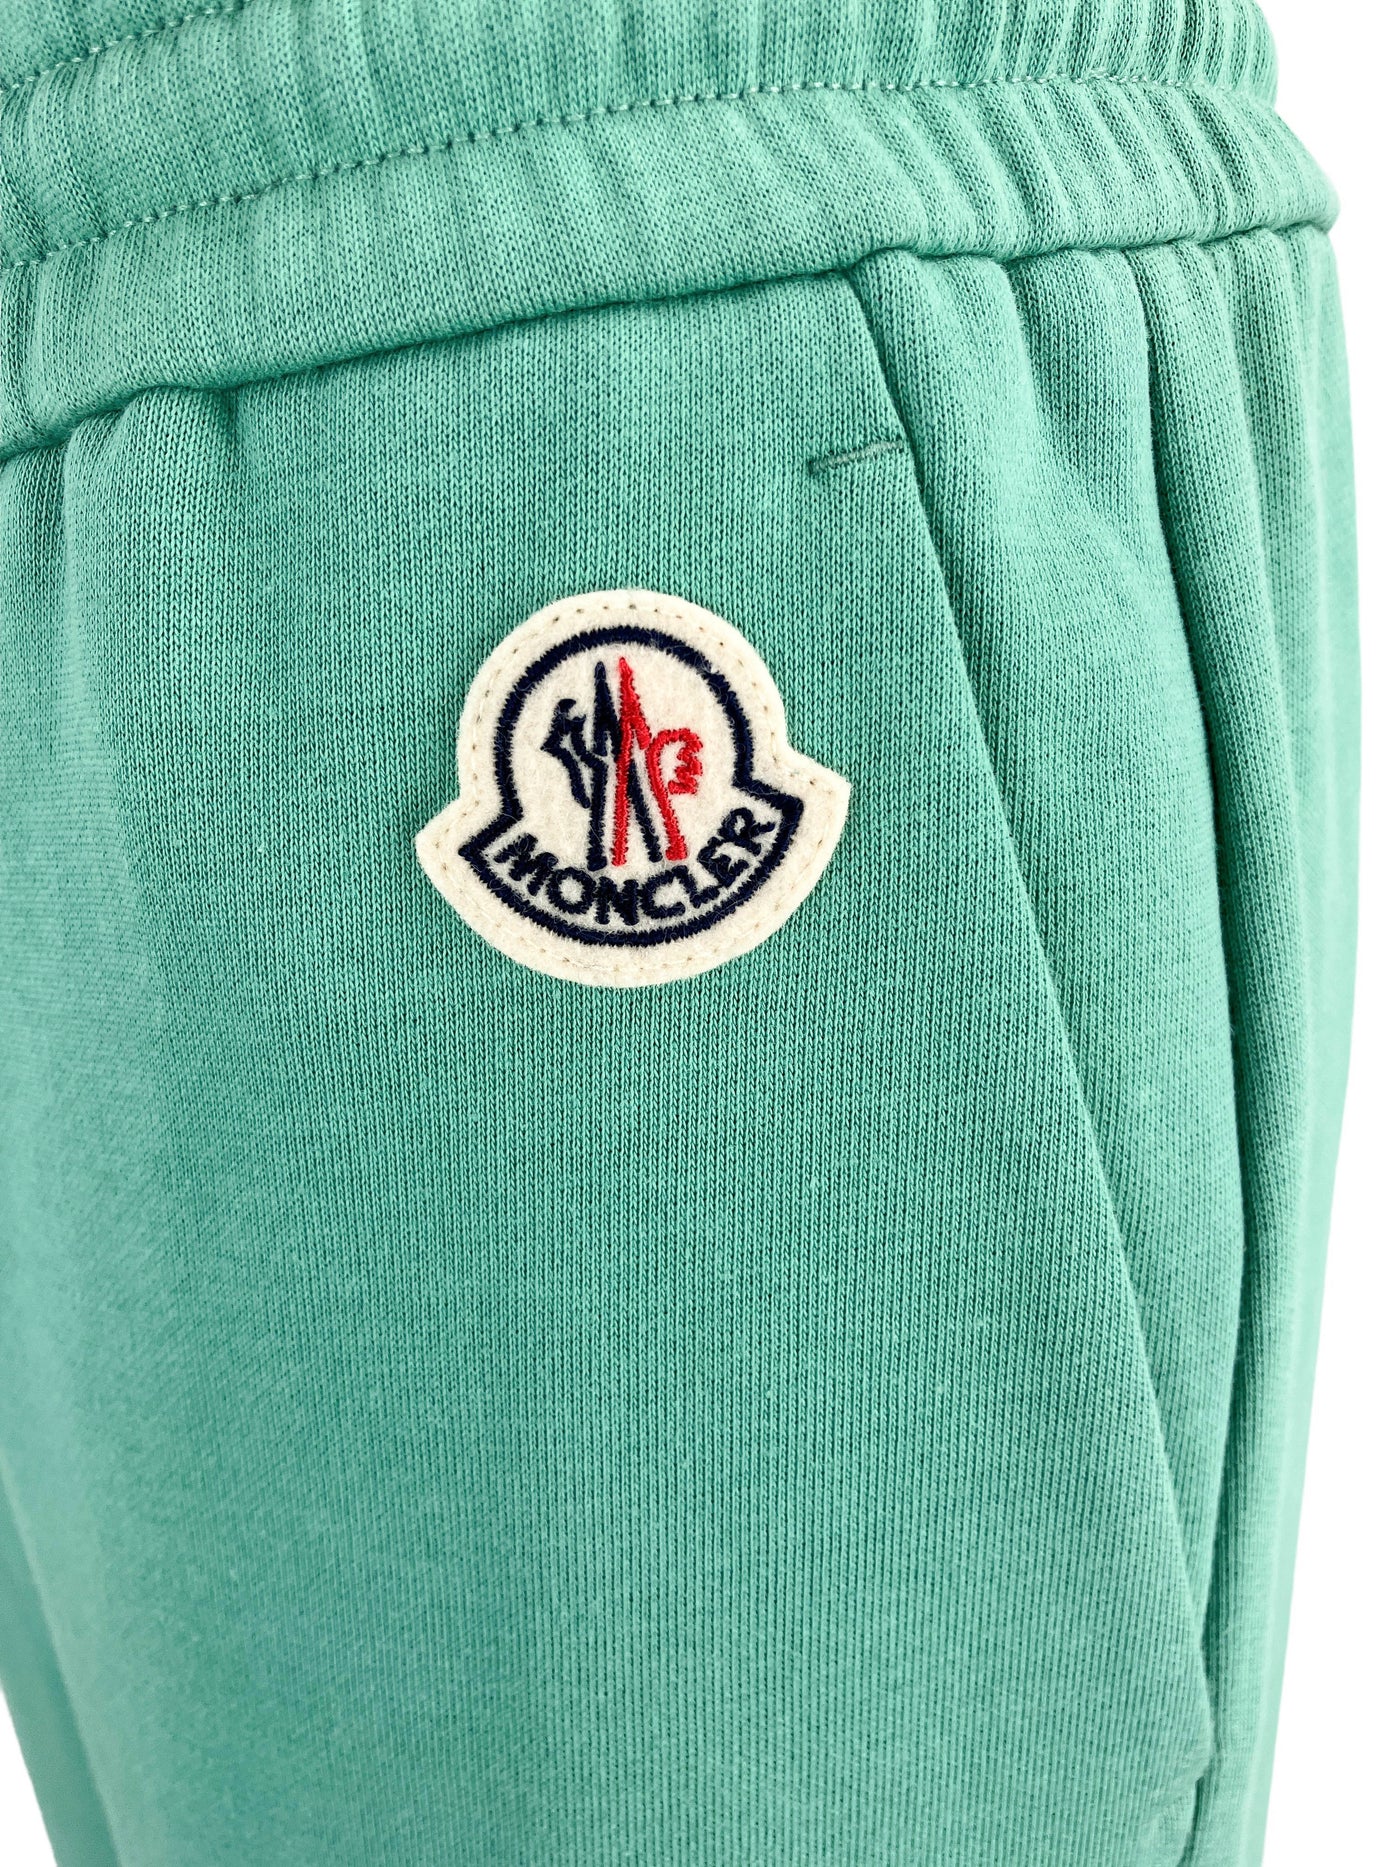 Moncler Sweatpants in Green - Discounts on Moncler at UAL